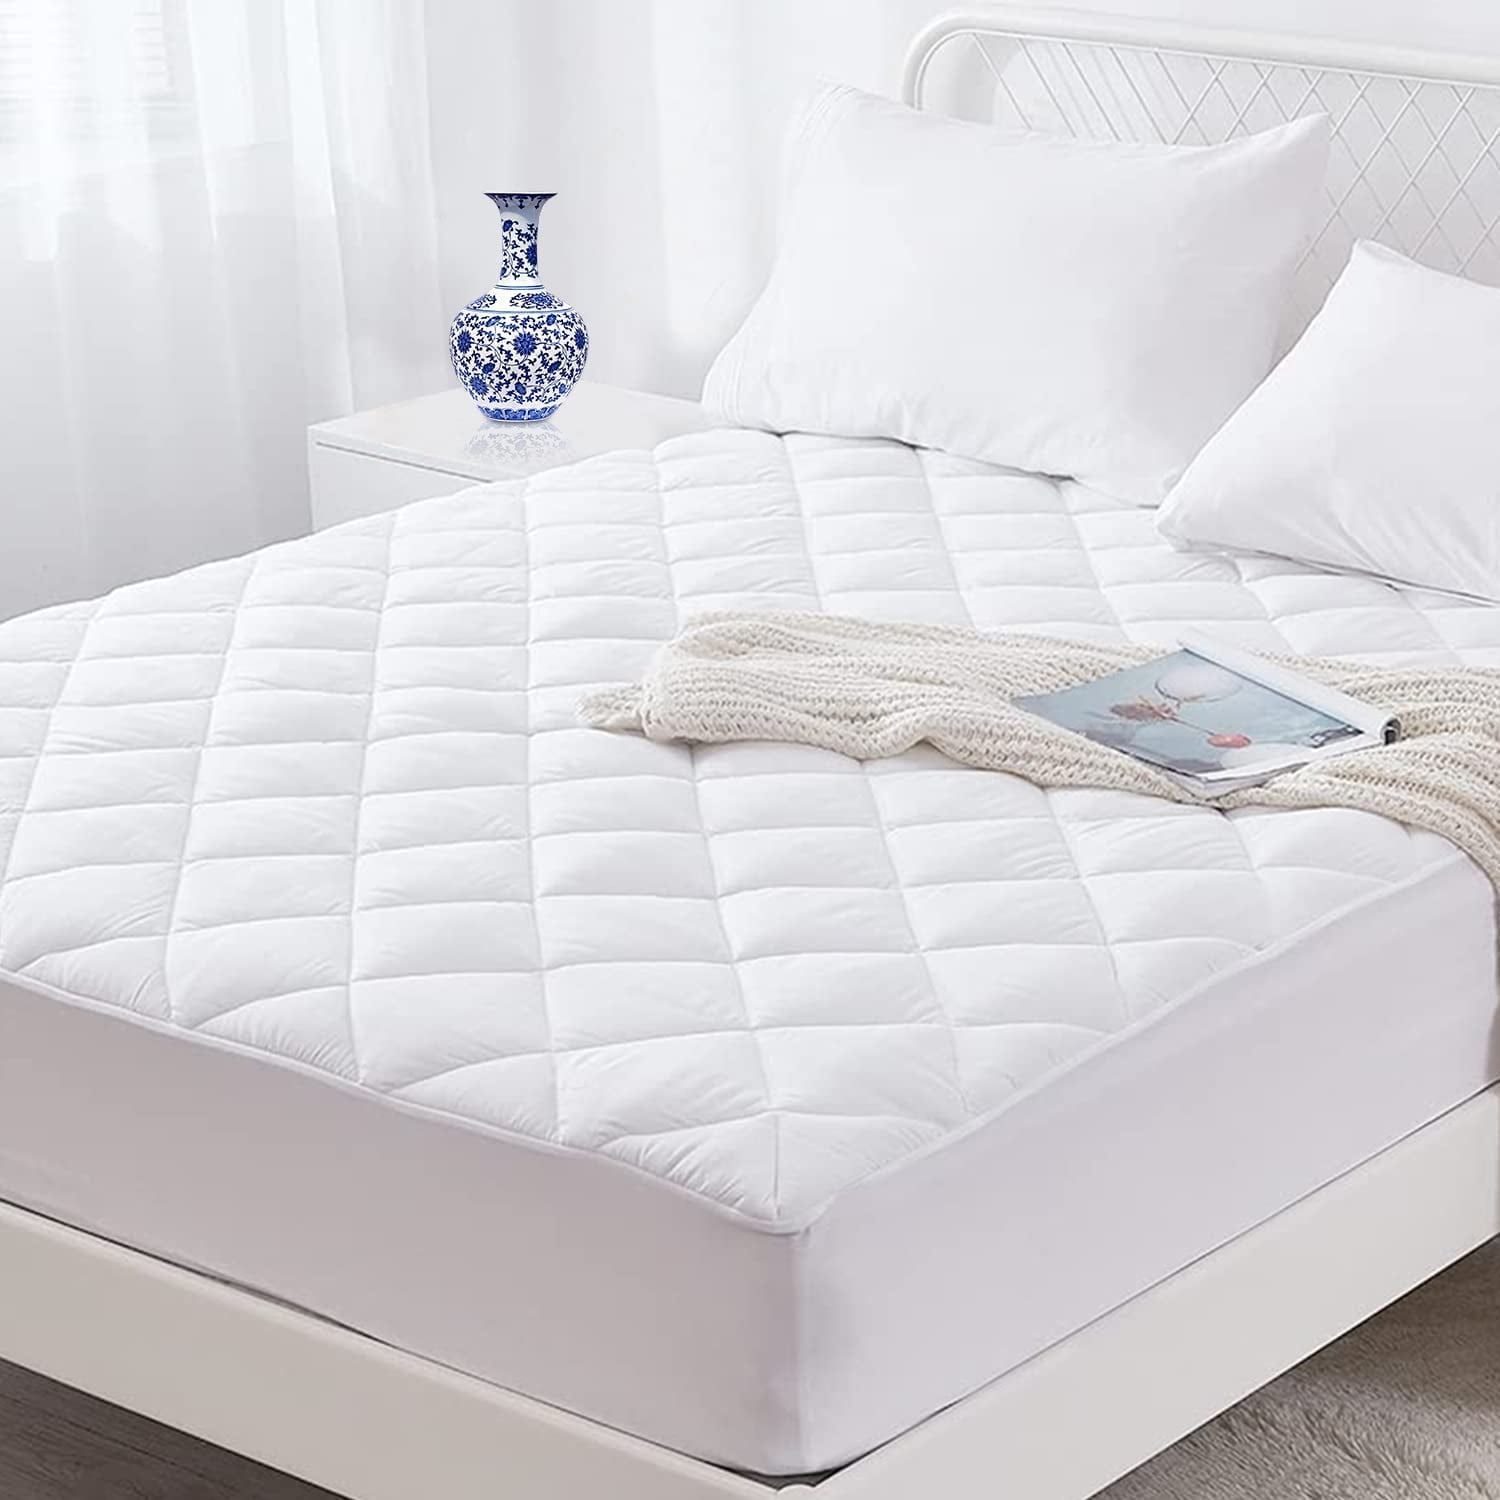 Quilted Mattress Pillow Cot Protector All Sizes In Stock Deep Fitted Bed Sheet 